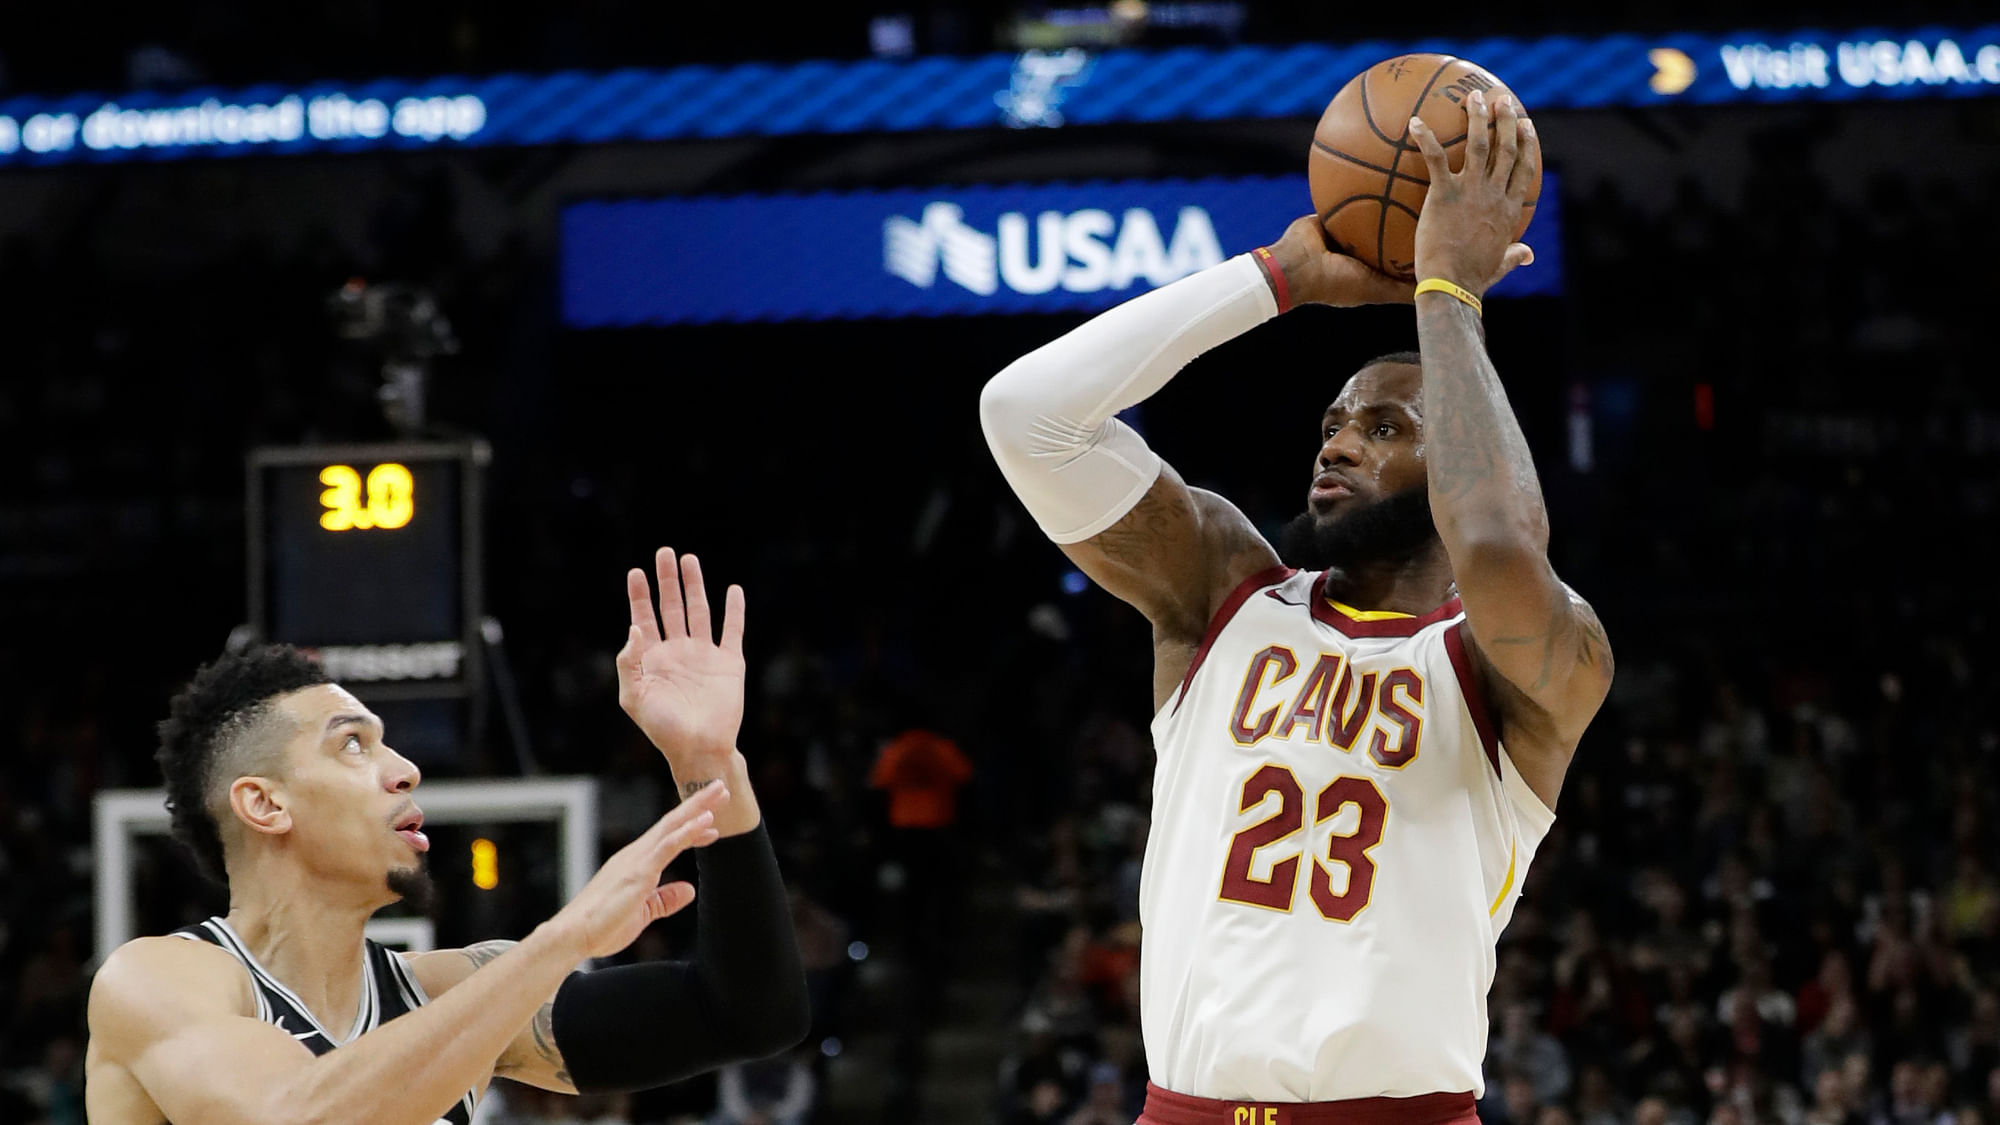 Cleveland Cavaliers forward LeBron James shoots and scores over San Antonio Spurs guard Danny Green.